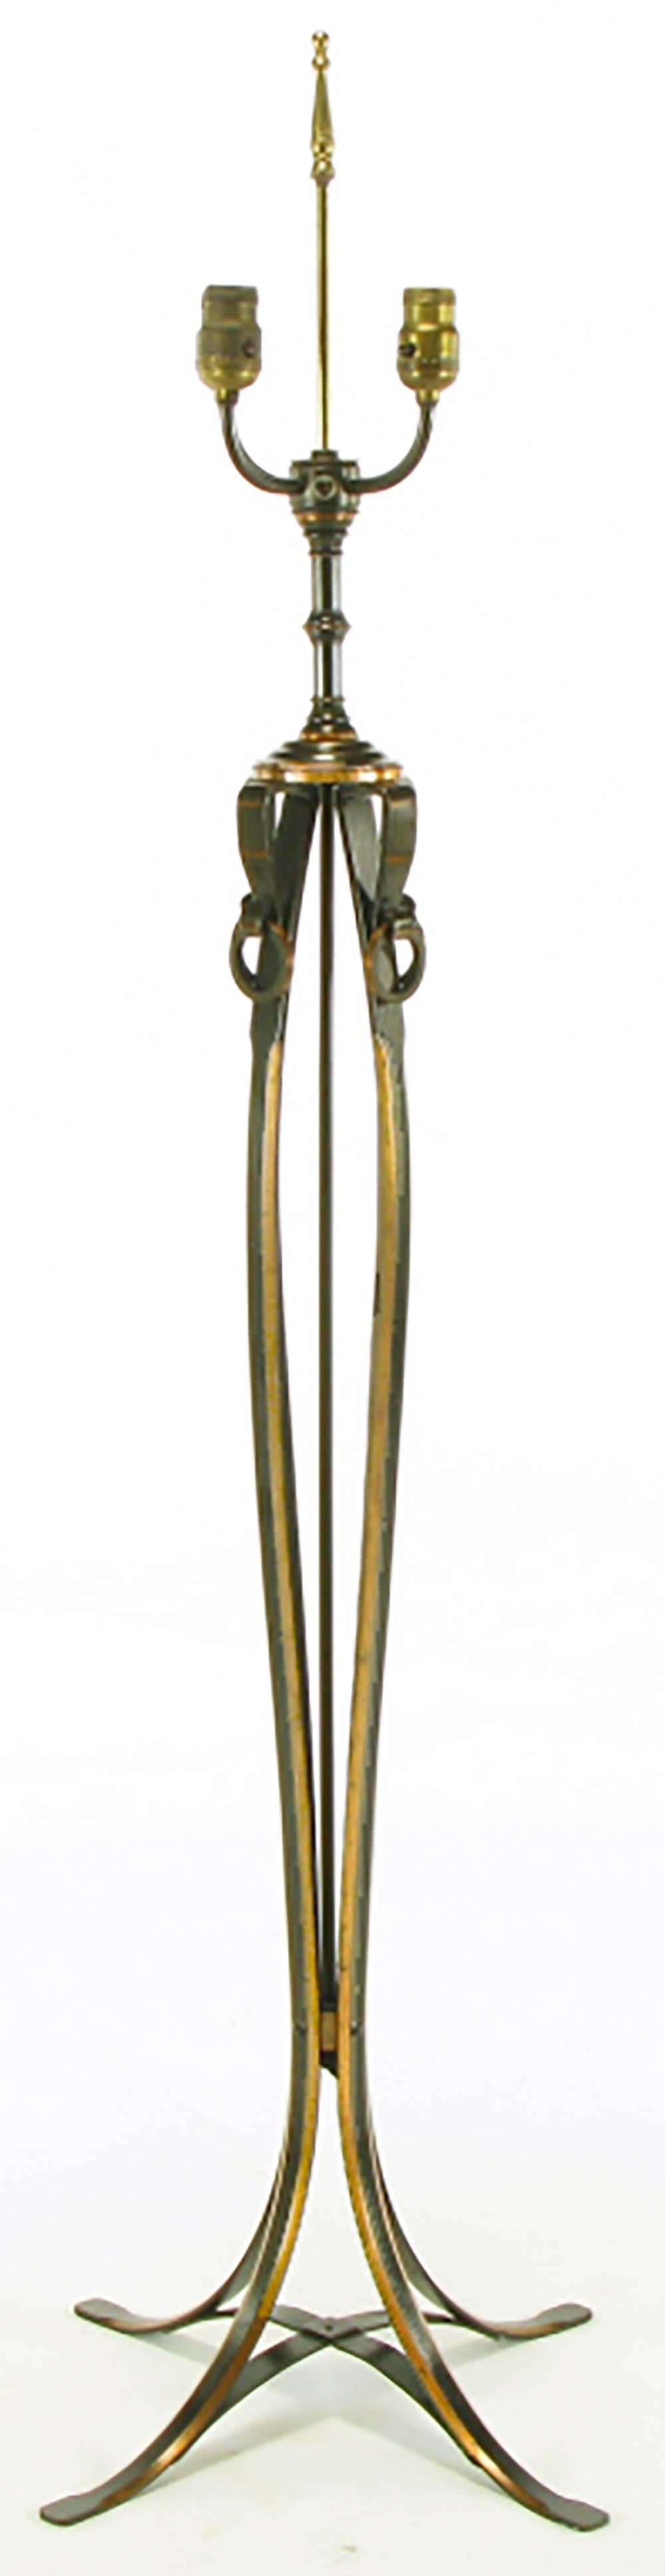 Bronze strap floor lamp with copper accents. Four bronze/copper straps make up the four leg base with a convex X-stretcher. The straps rise up, flare out in the middle and then come together to make then support for the stepped cap. Each bronze is